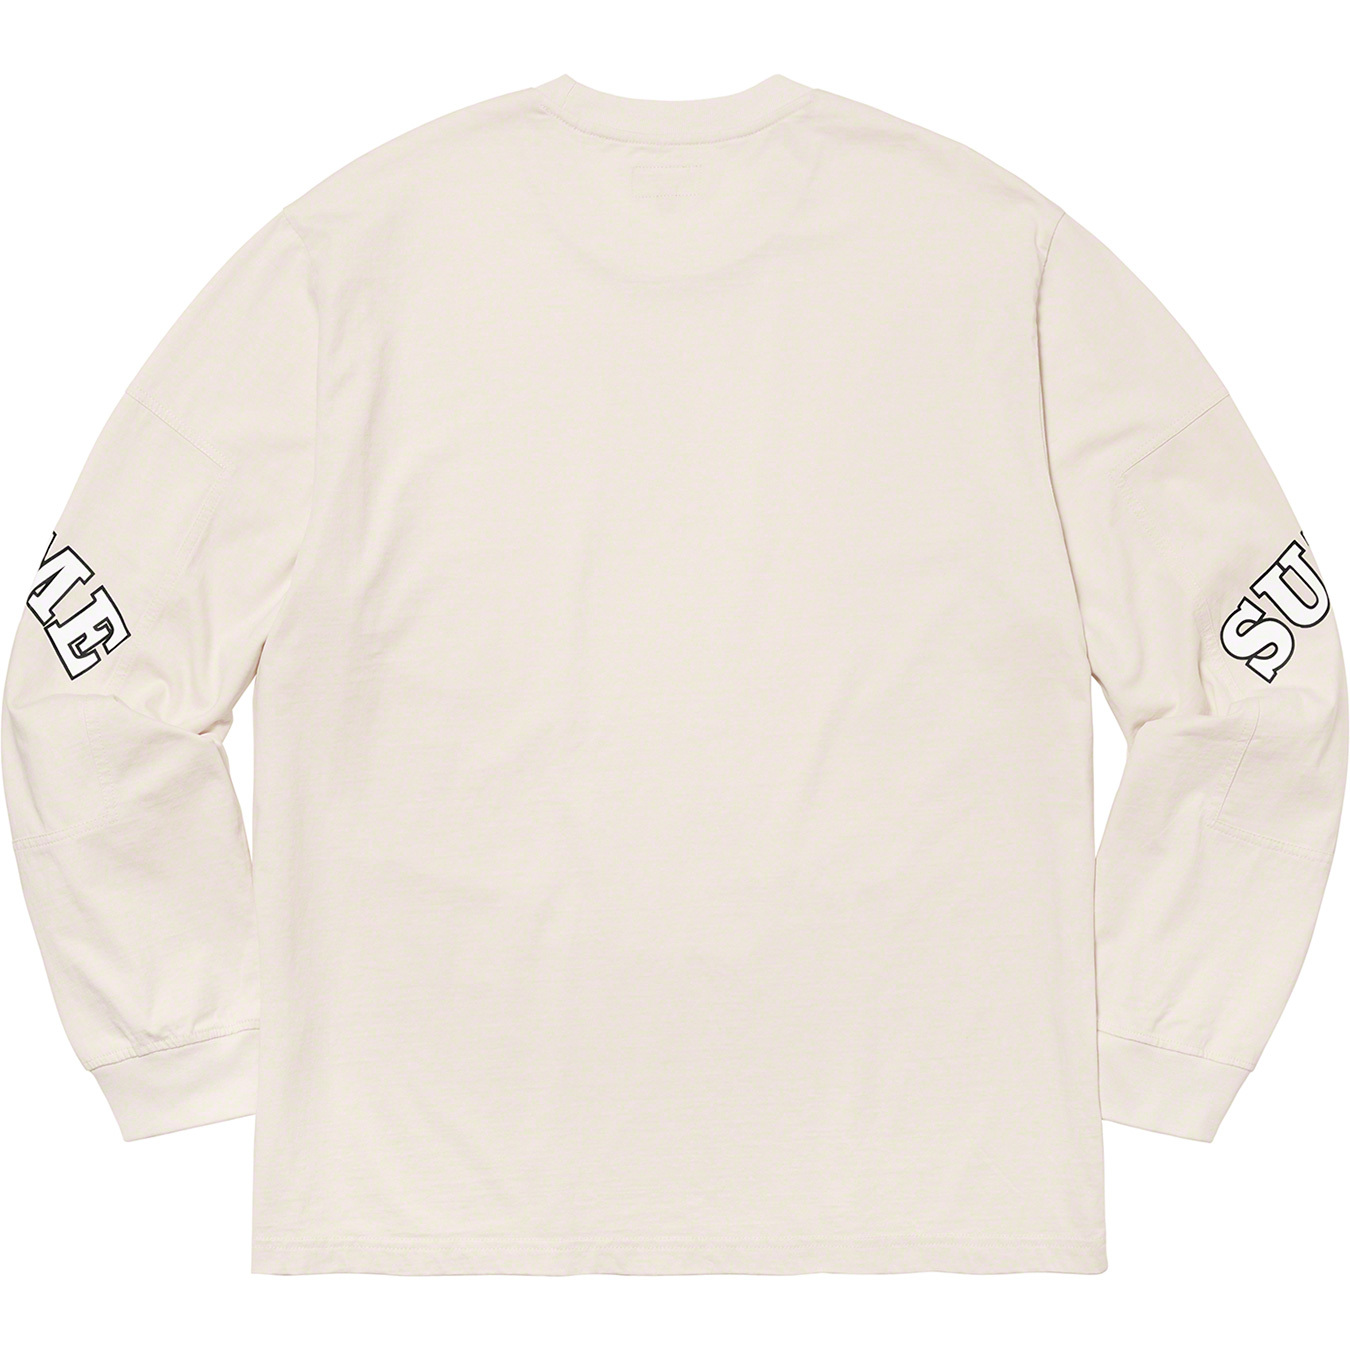 Cutout Sleeves L/S Top - Supreme Community